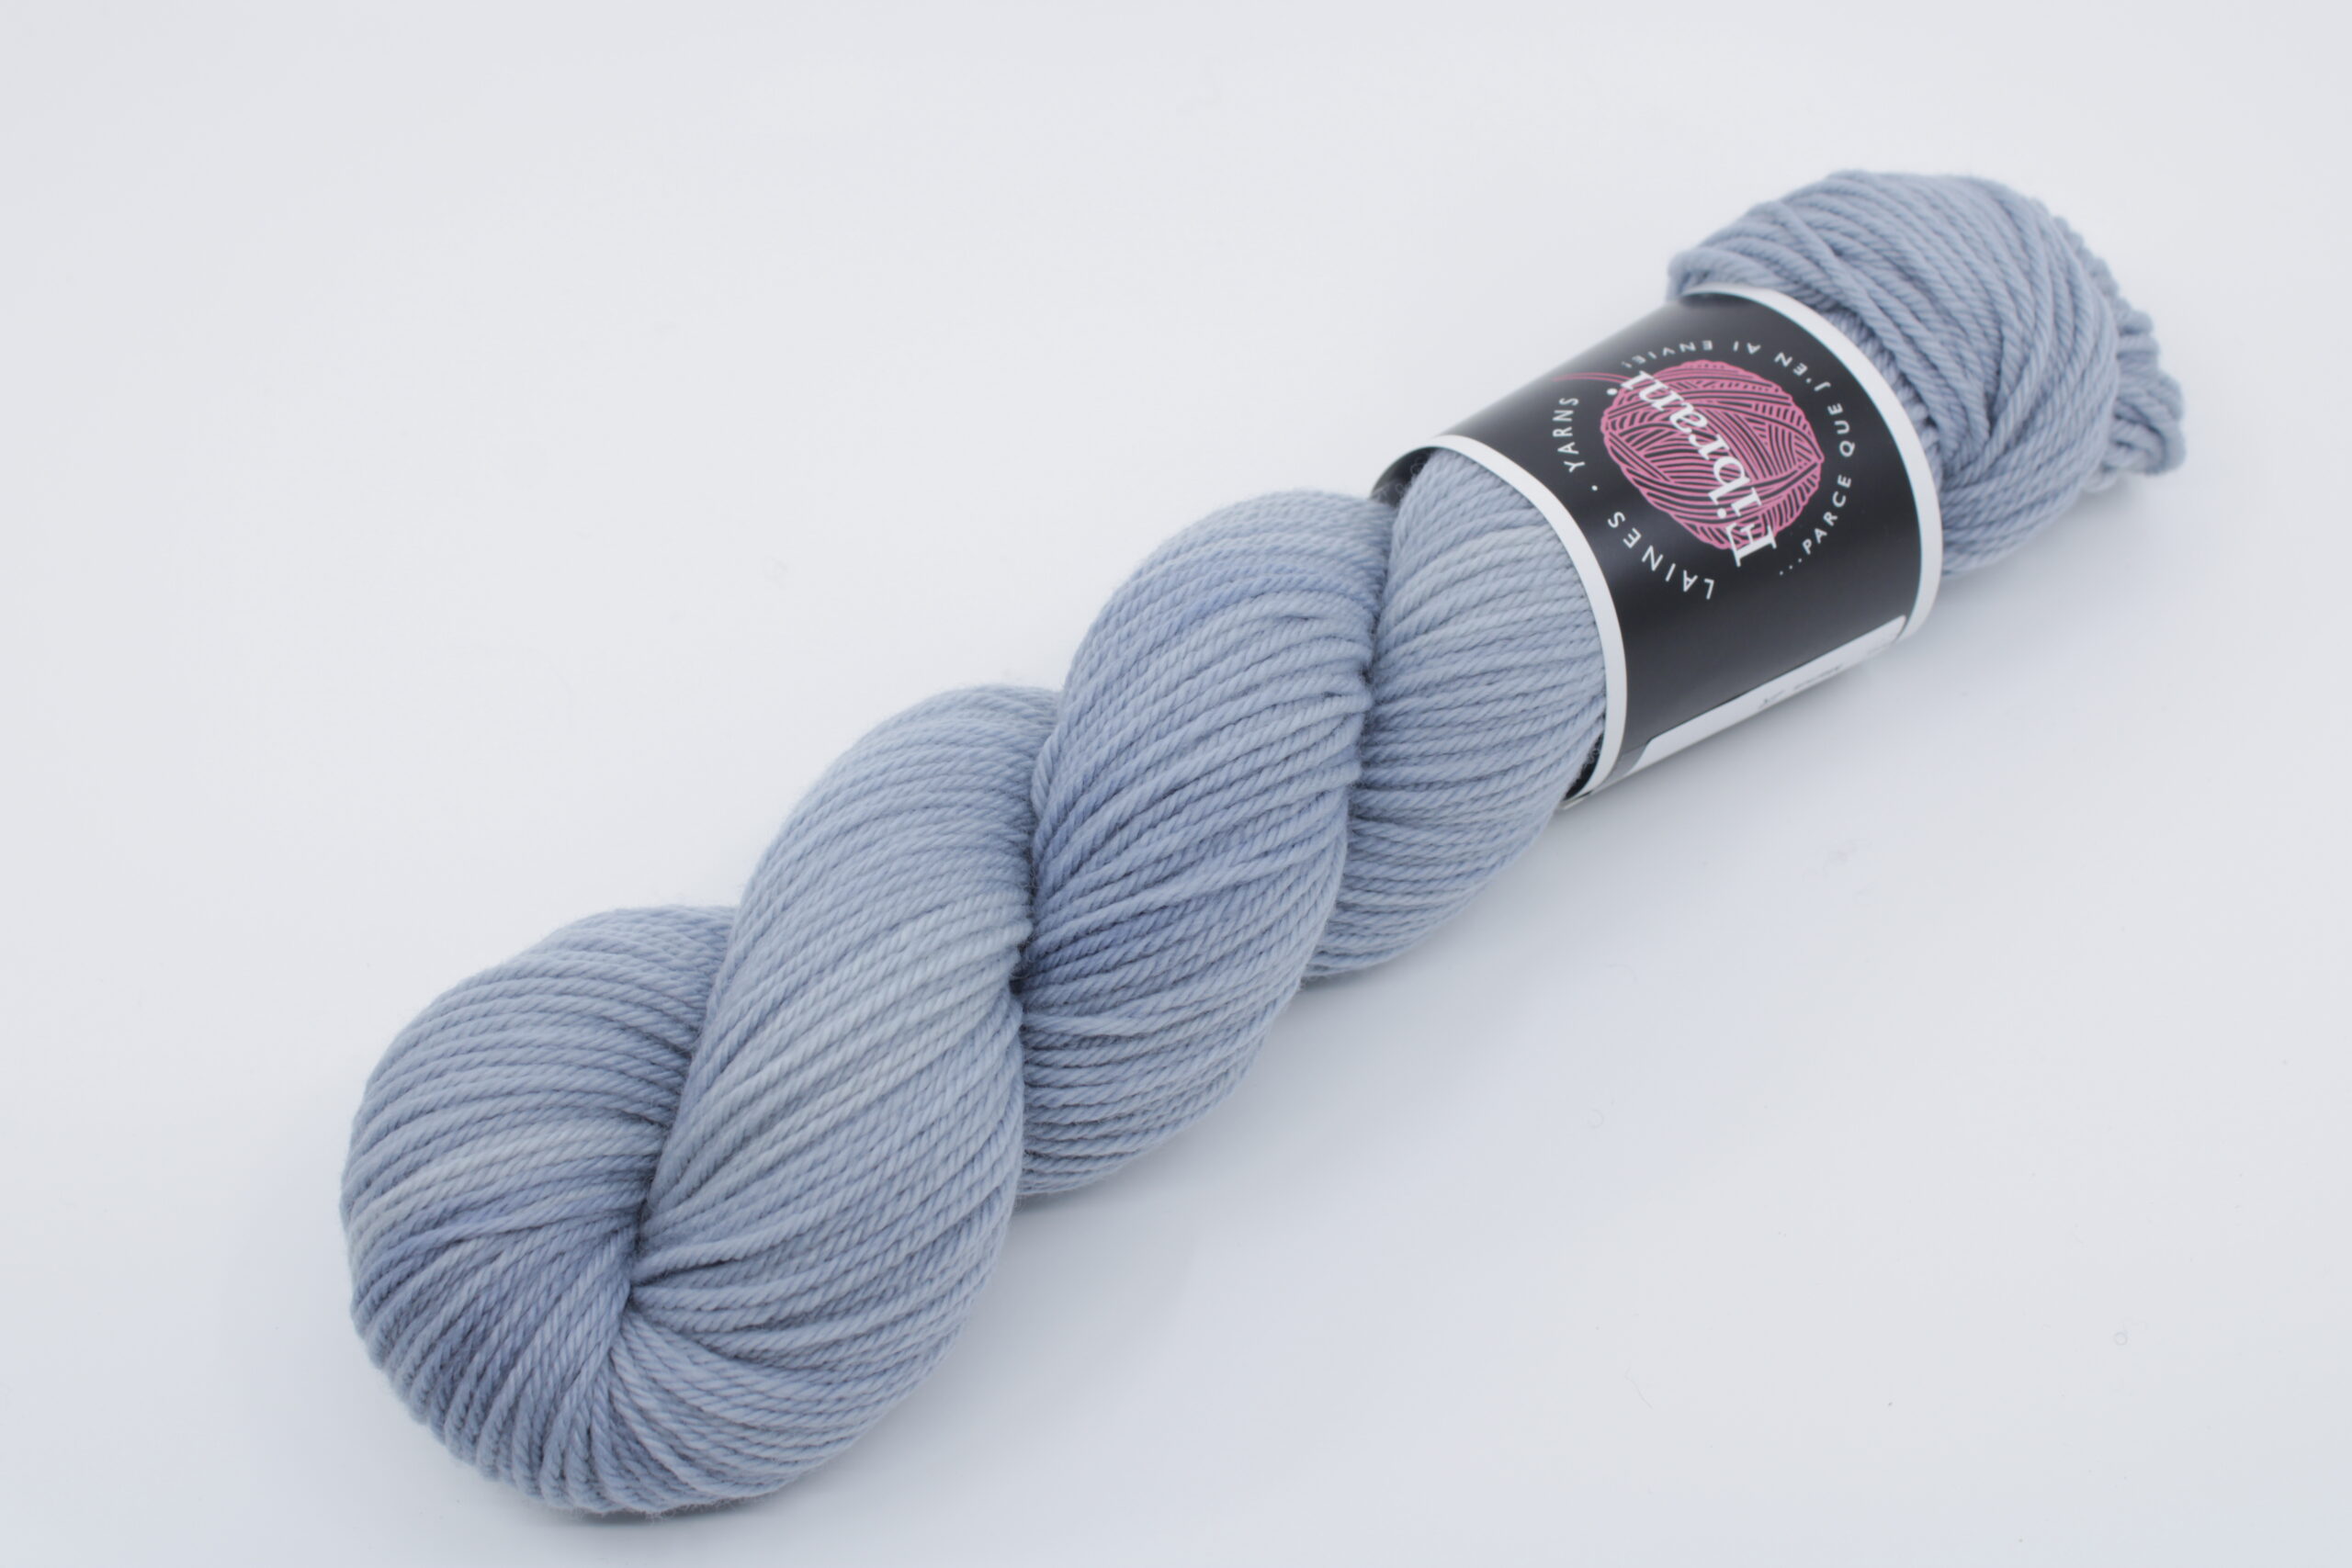 Folcon worsted base. Wool 100% untreated merino. Trio of colors: blue. Color: Marius.